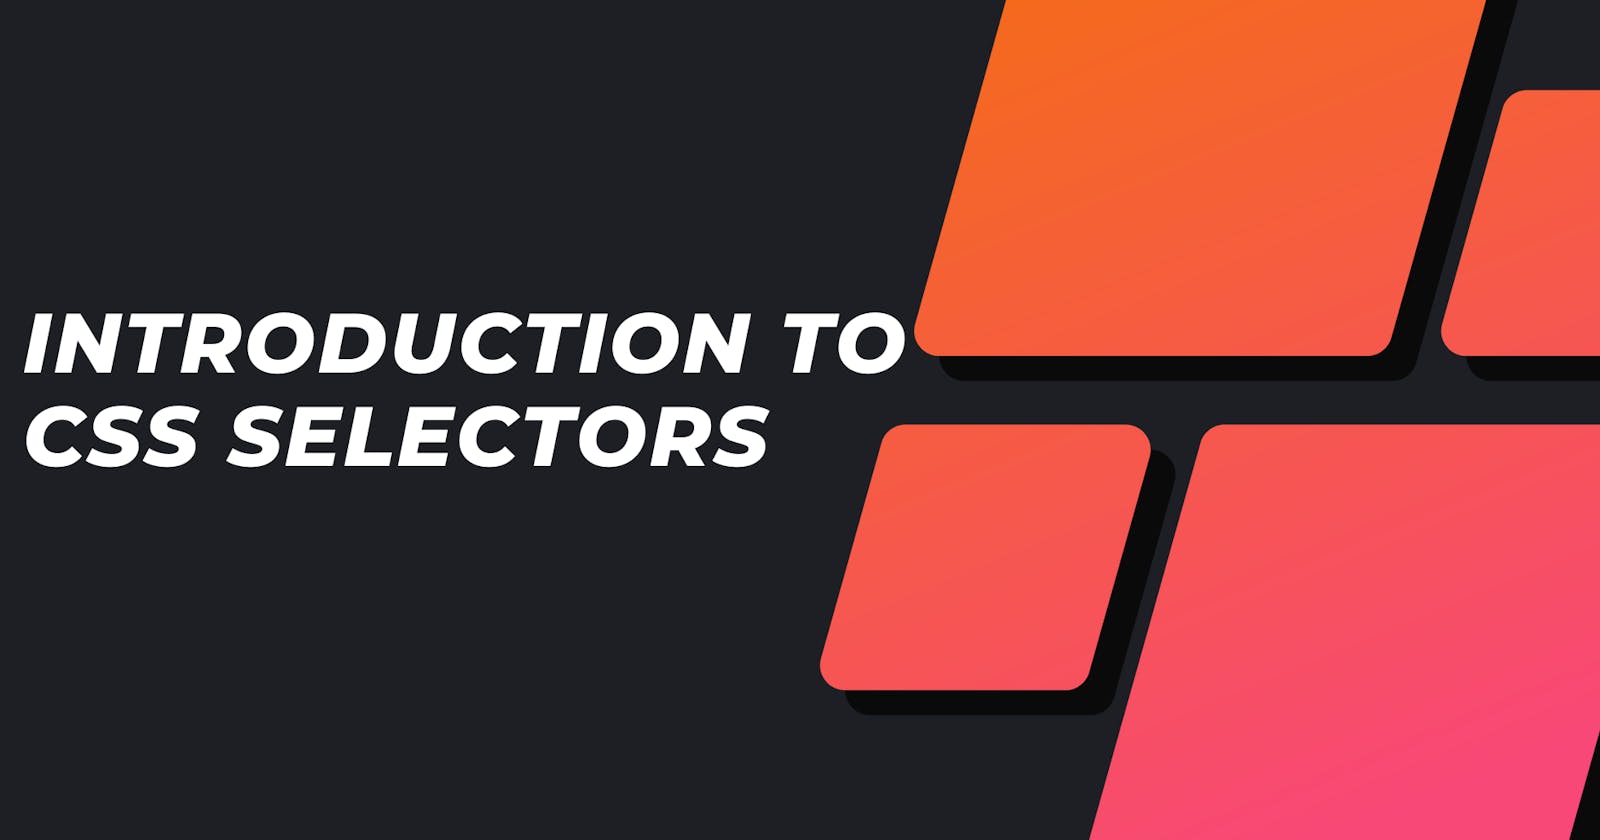 Introduction to CSS Selectors